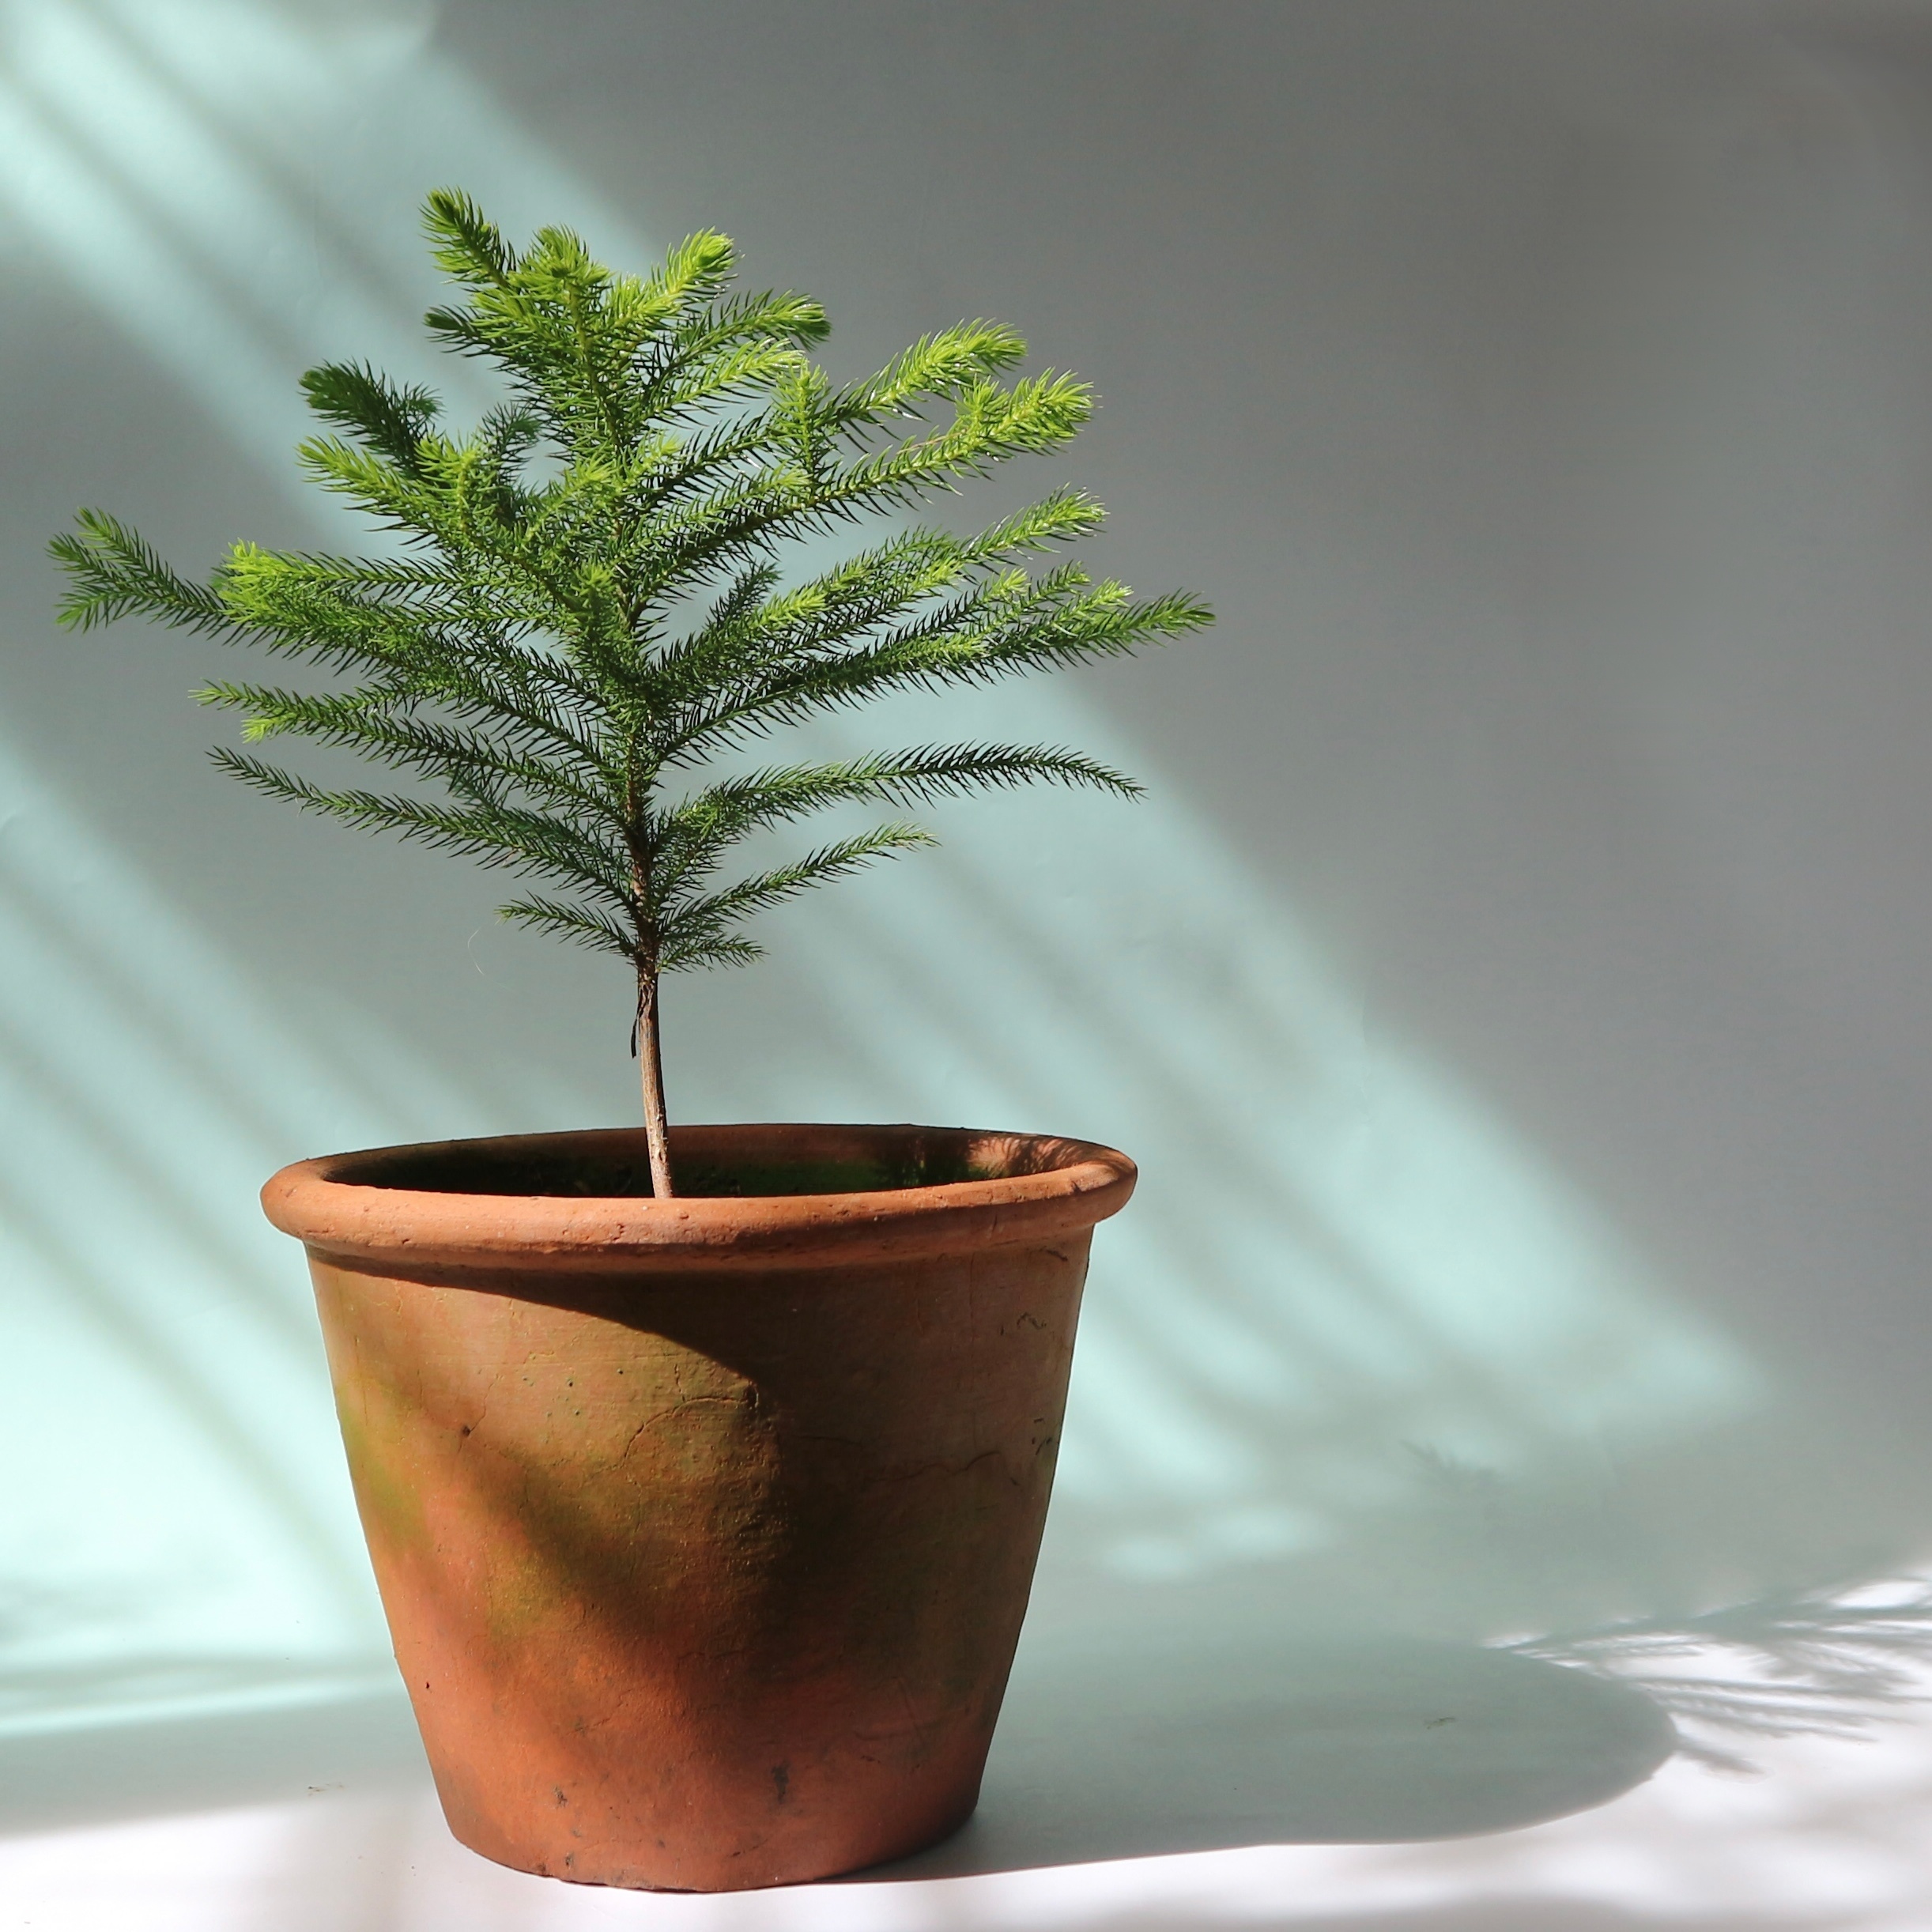 The best way to repot your Norfolk Pine